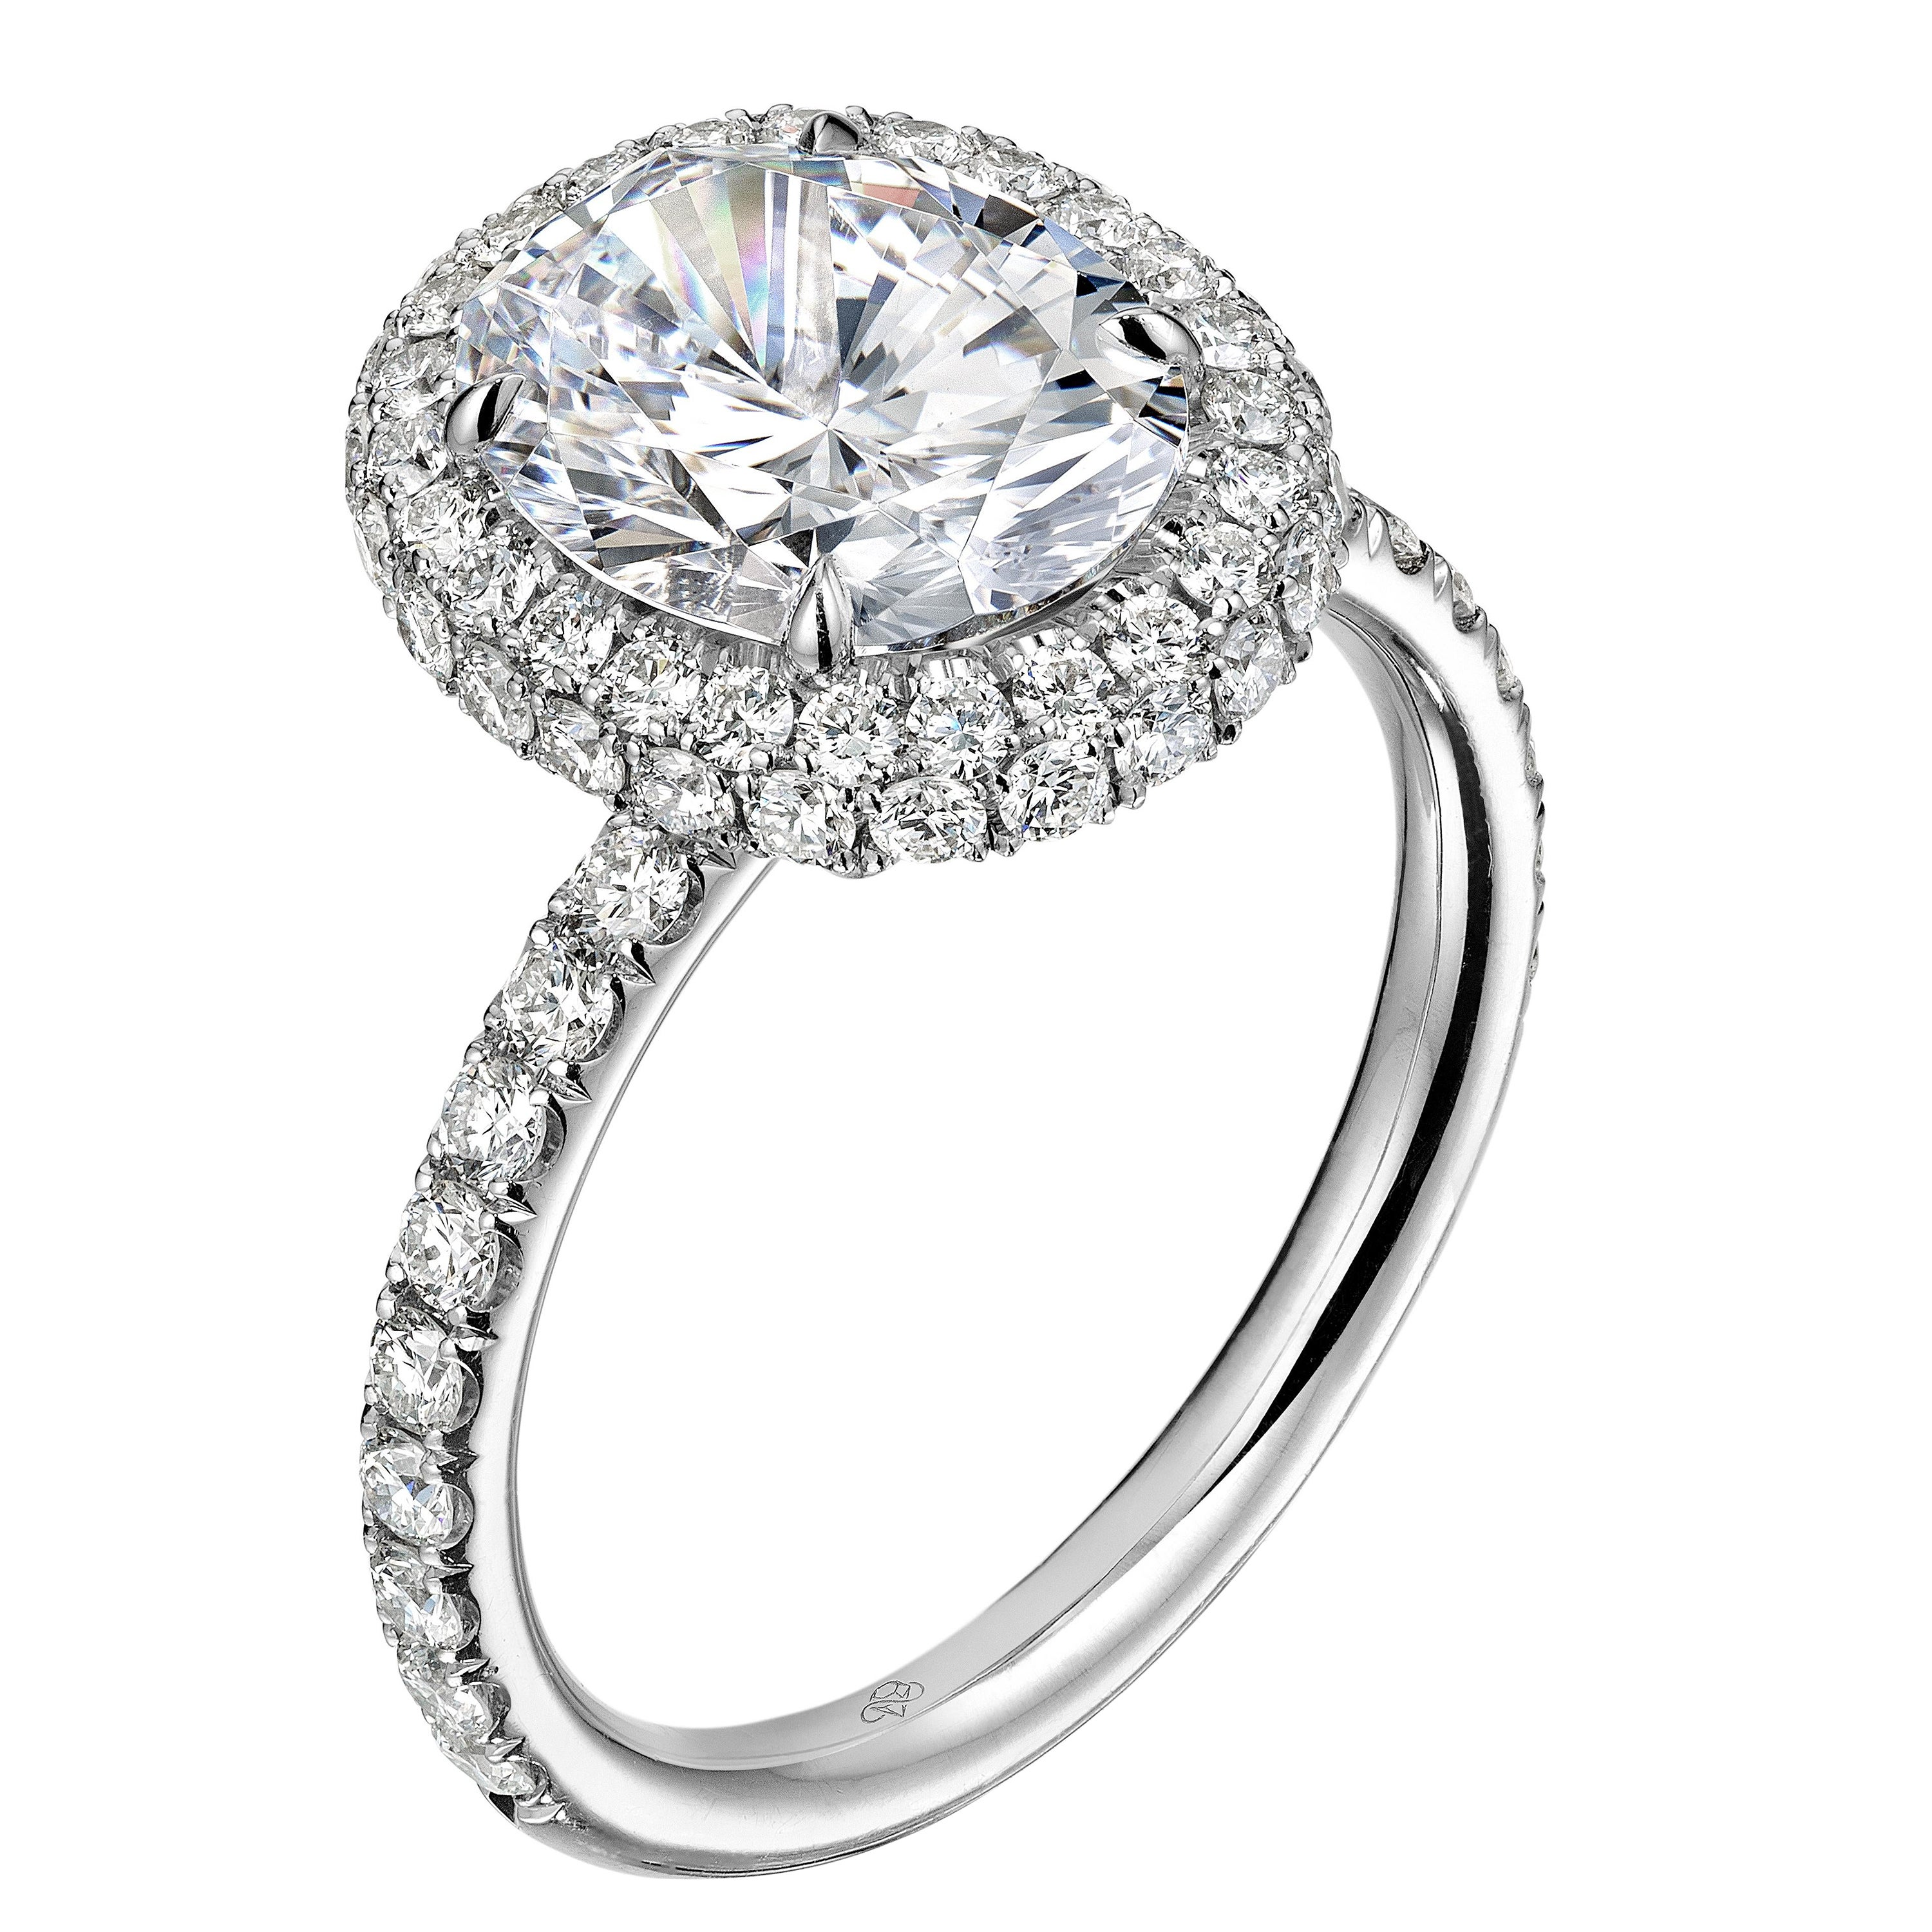 GIA Certified 2.50 Carat E SI1 Oval Diamond Engagement Ring "Camila" For Sale